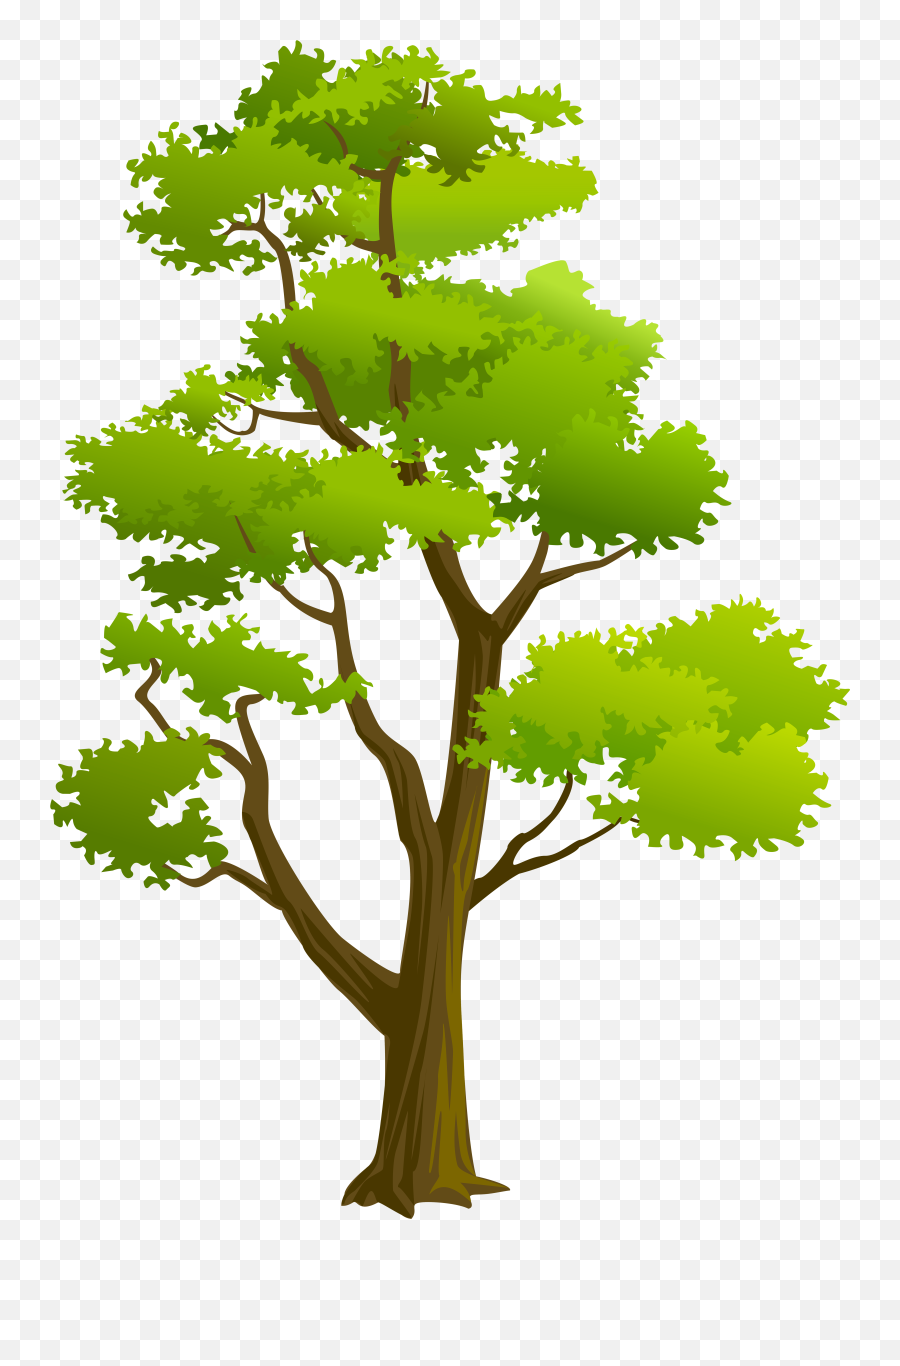 Tree Clipart High Resolution Tree High Resolution - High Resolution Tree Clipart Hd Emoji,Emoji High Definition